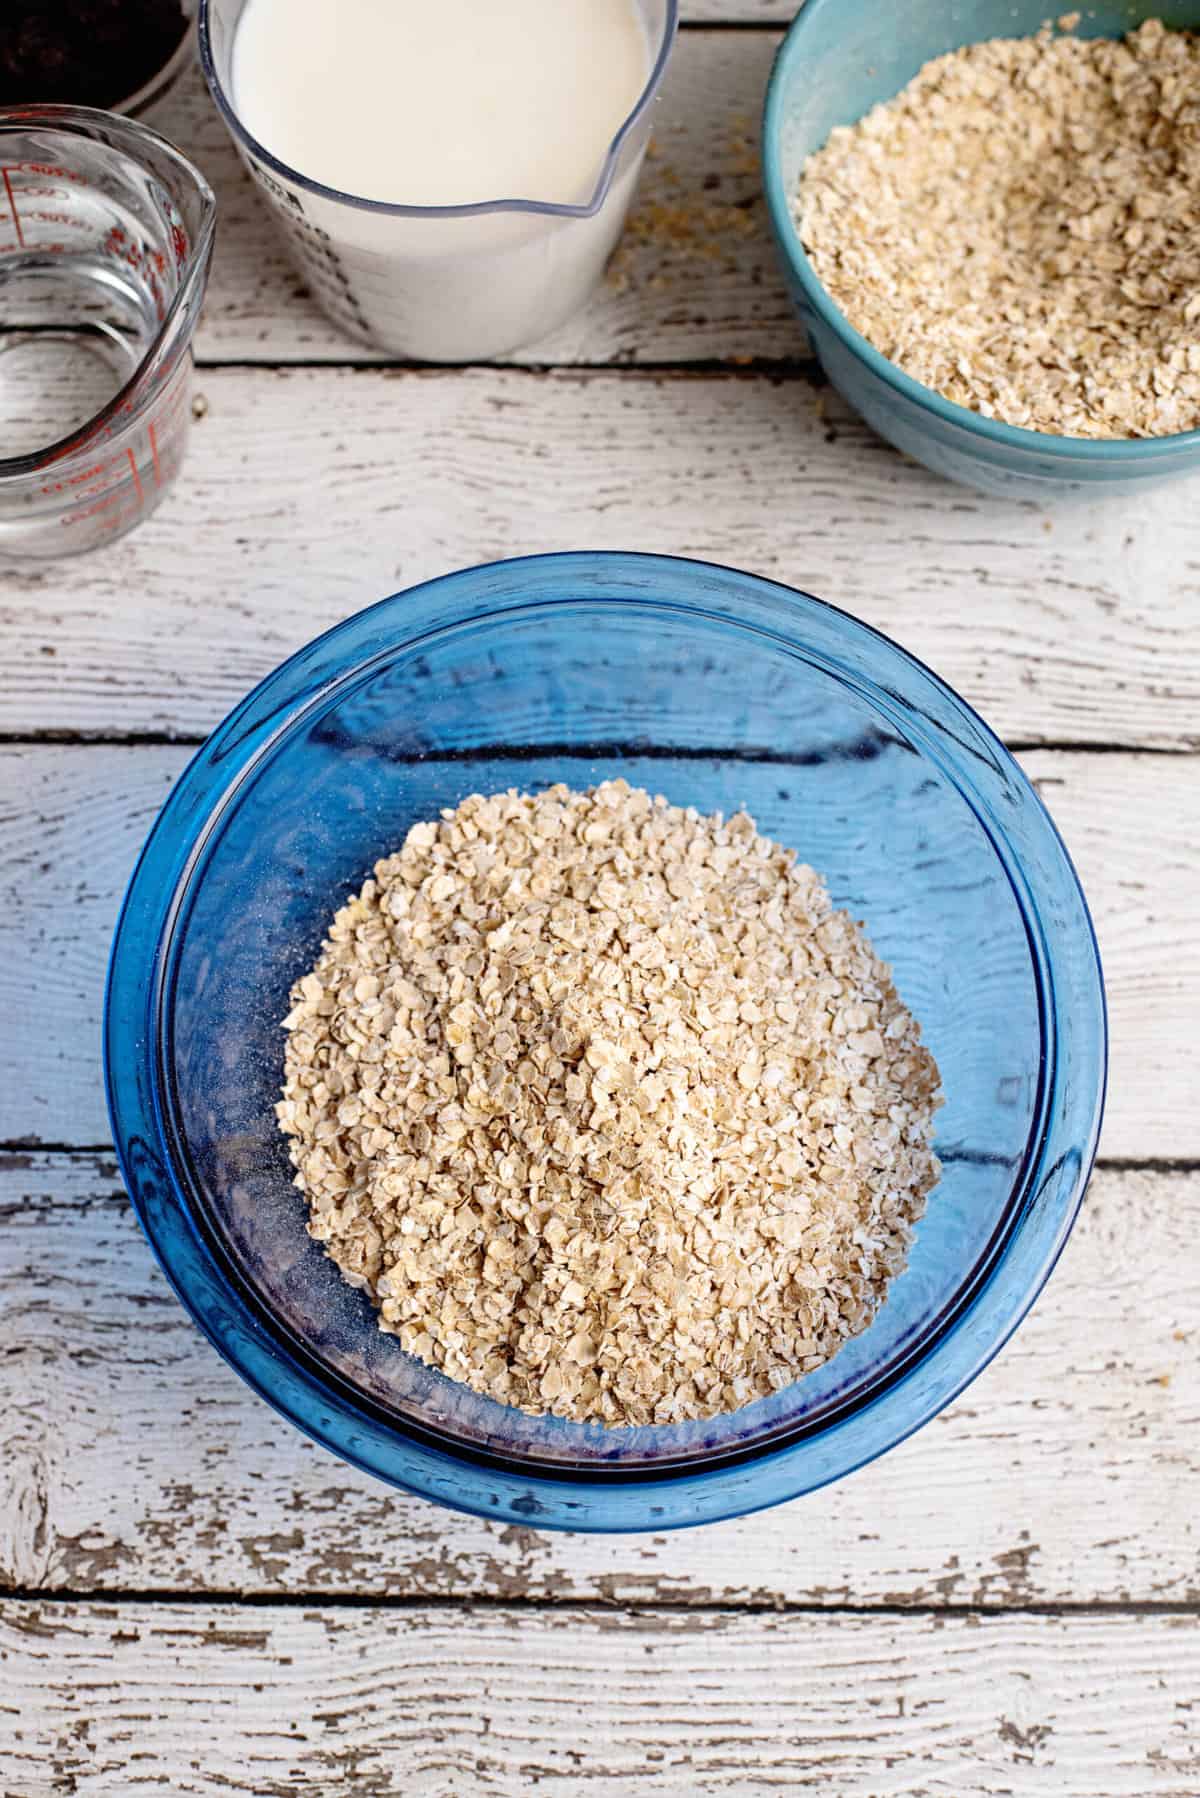 place oats in mixing bowl